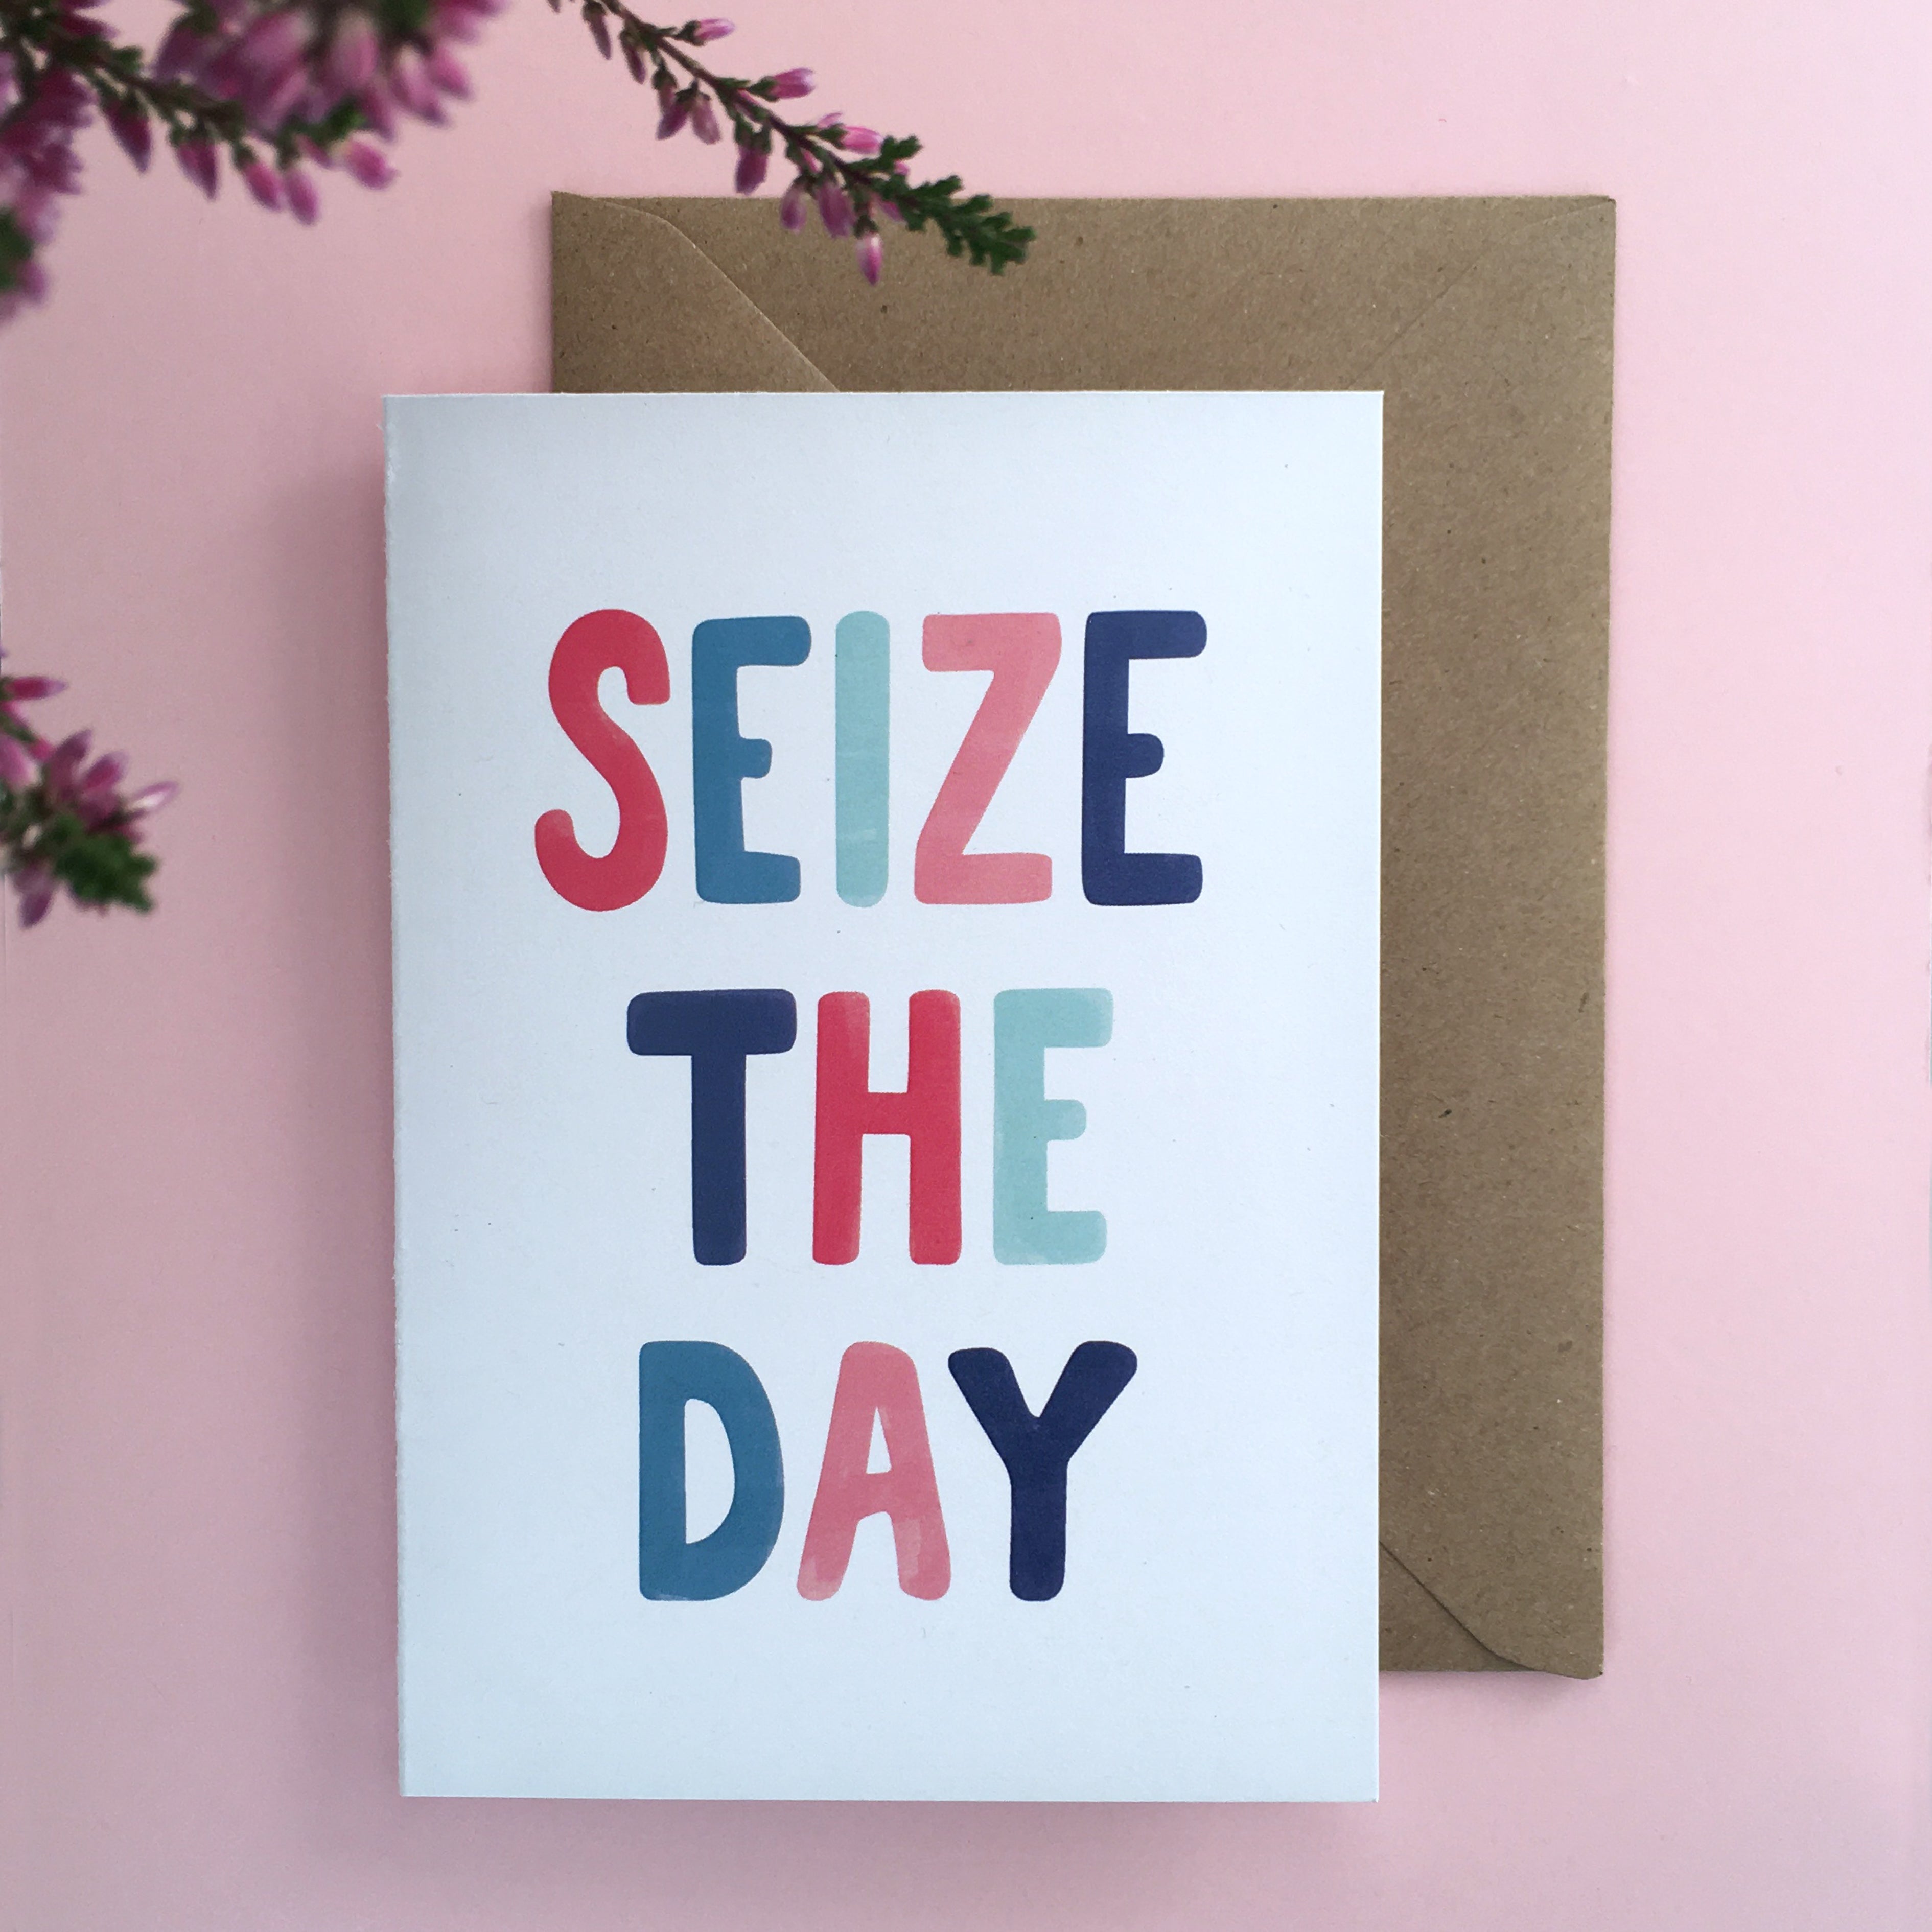 ‘Seize the Day’ eco-friendly greeting card